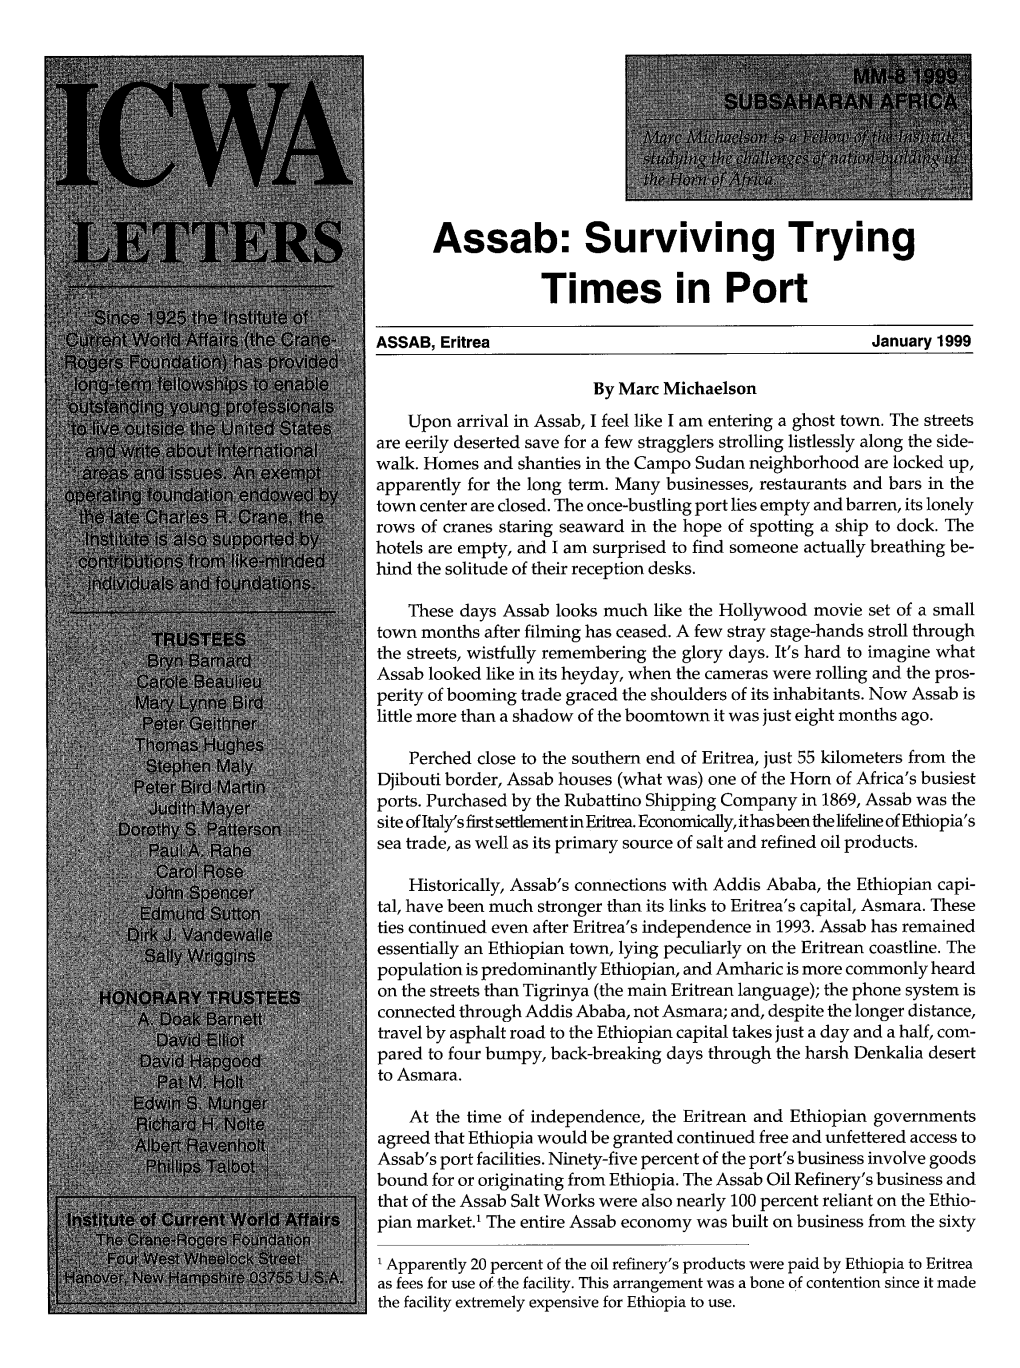 Assab: Surviving Trying Times in Port